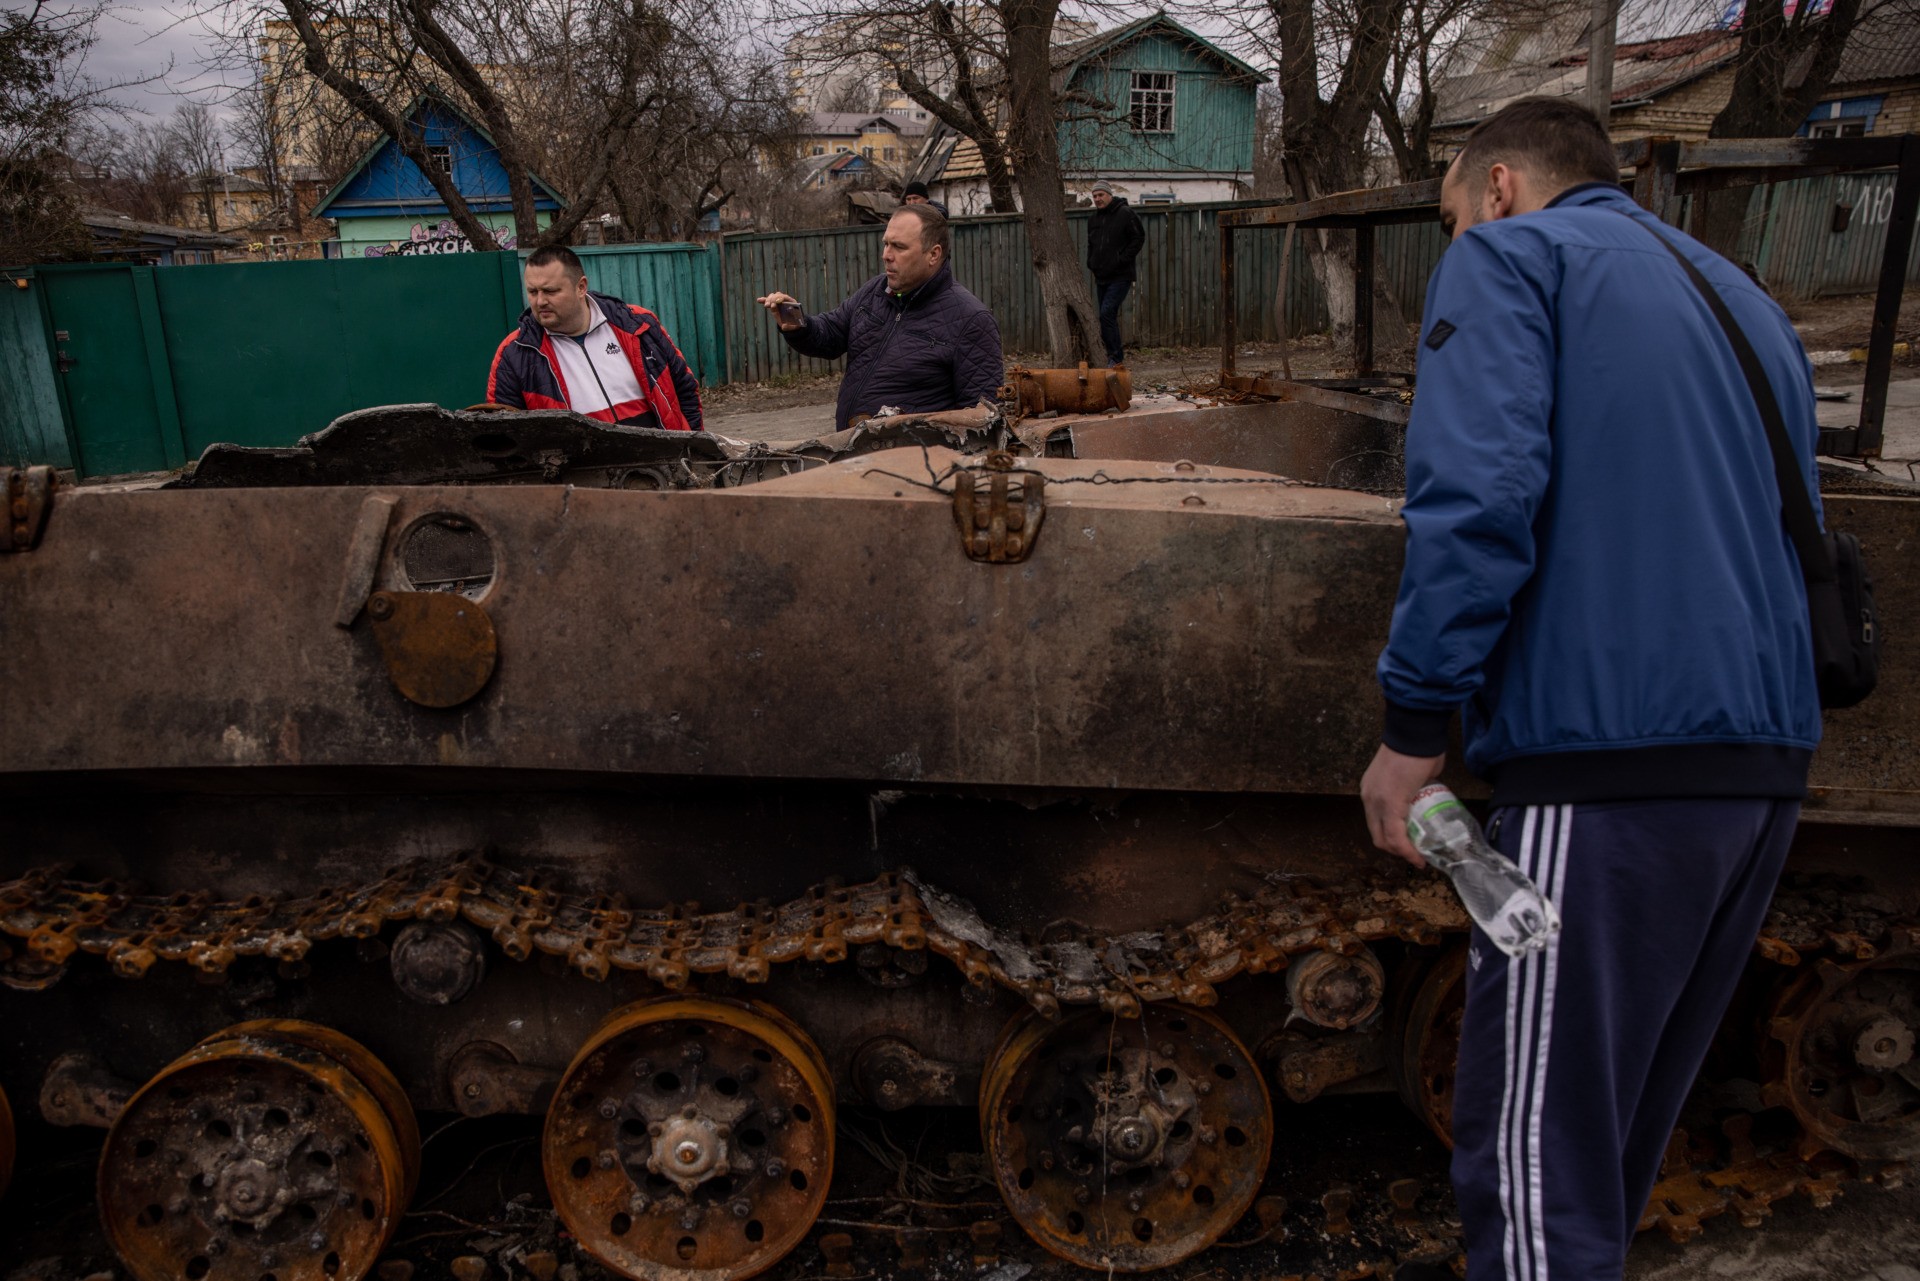 BUCHA, UKRAINE - APRIL 06: People look at a destroyed Russian military vehicle on a street on April 06, 2022 in Bucha, Ukraine.  The Ukrainian government has accused Russian forces of: a 